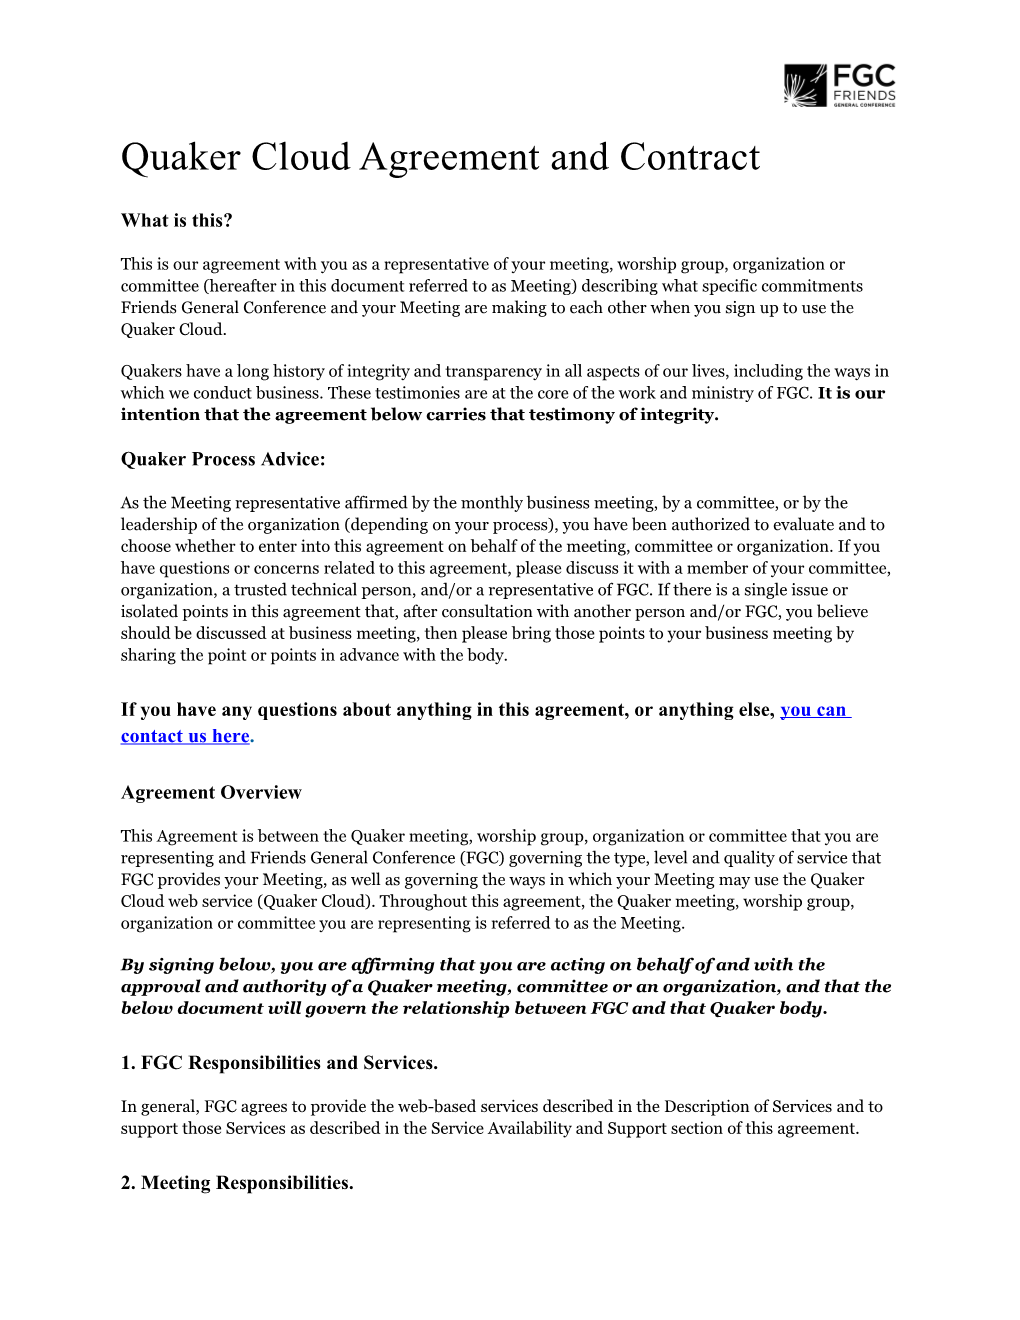 Quaker Cloud Agreement and Contract